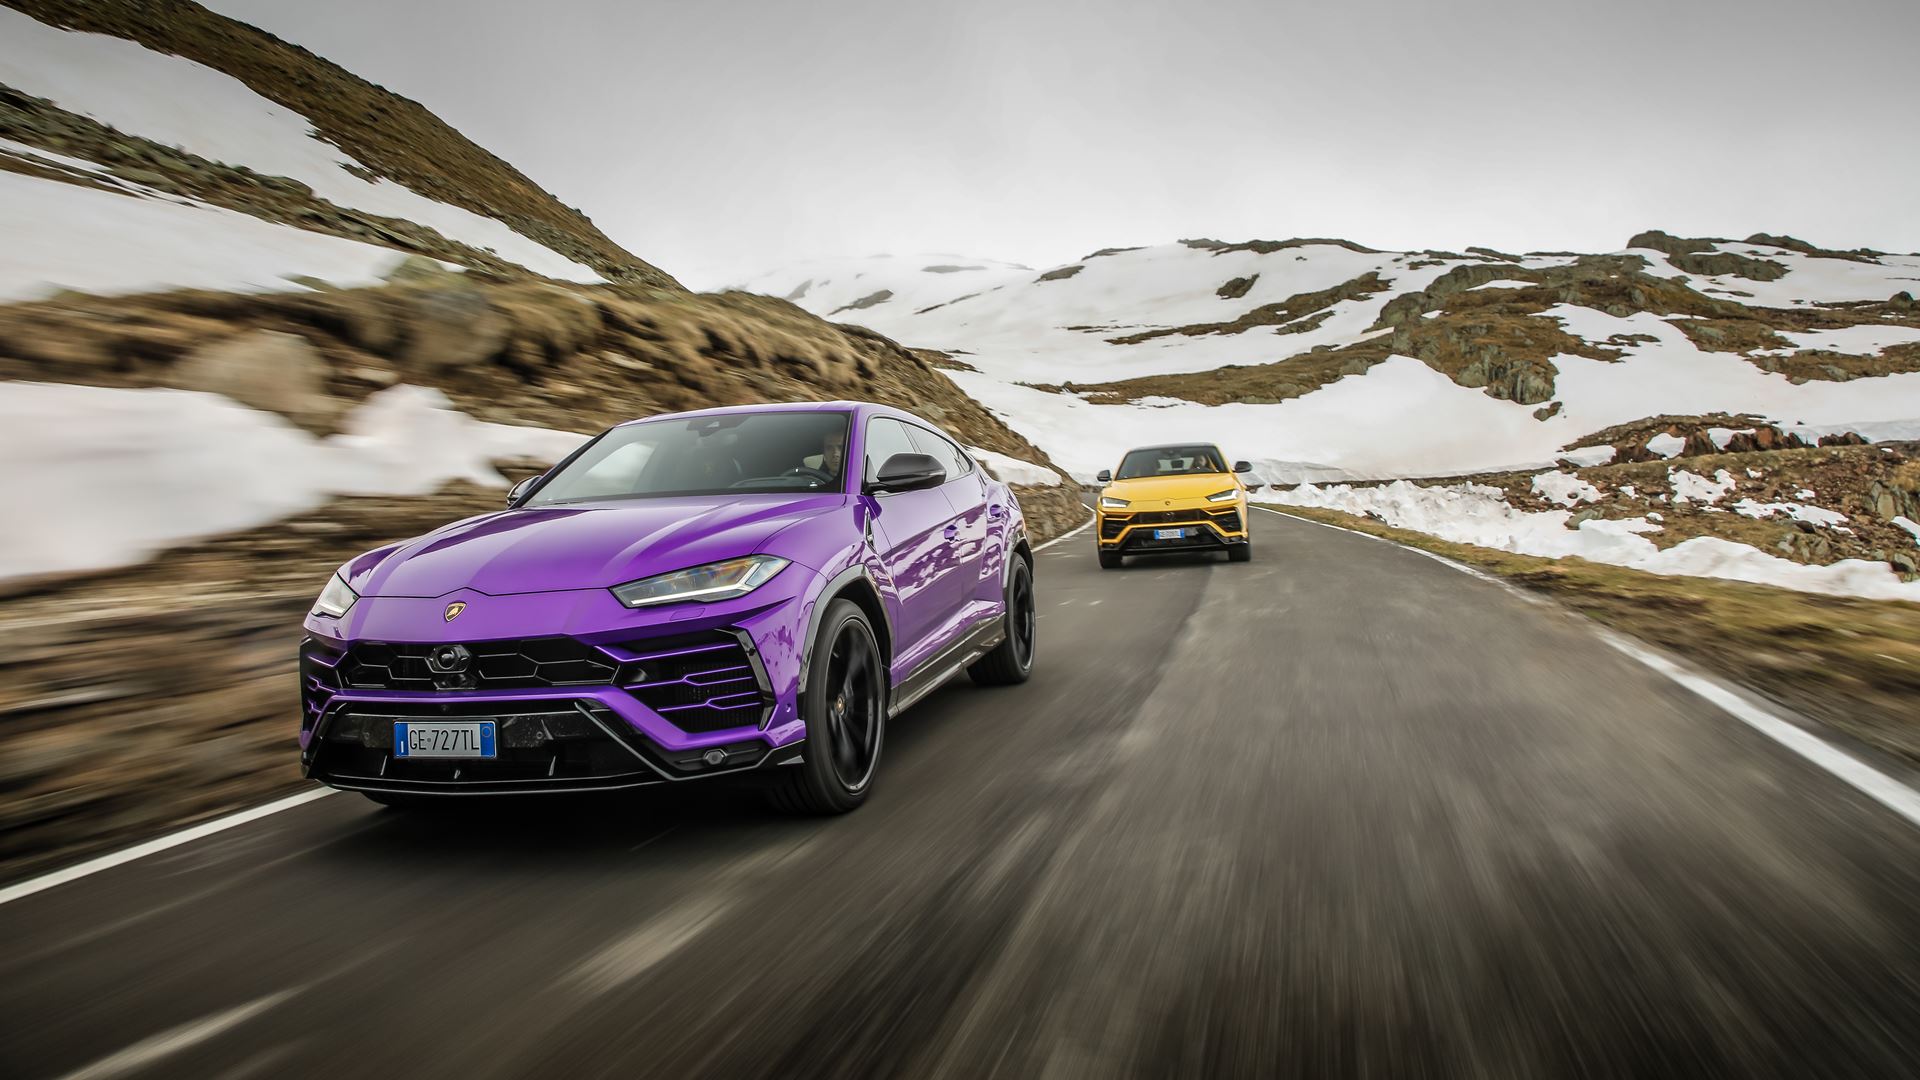 A record-breaking 2021 for Automobili Lamborghini - The company recorded its best year ever, with 8,405 cars delivered - Image 4